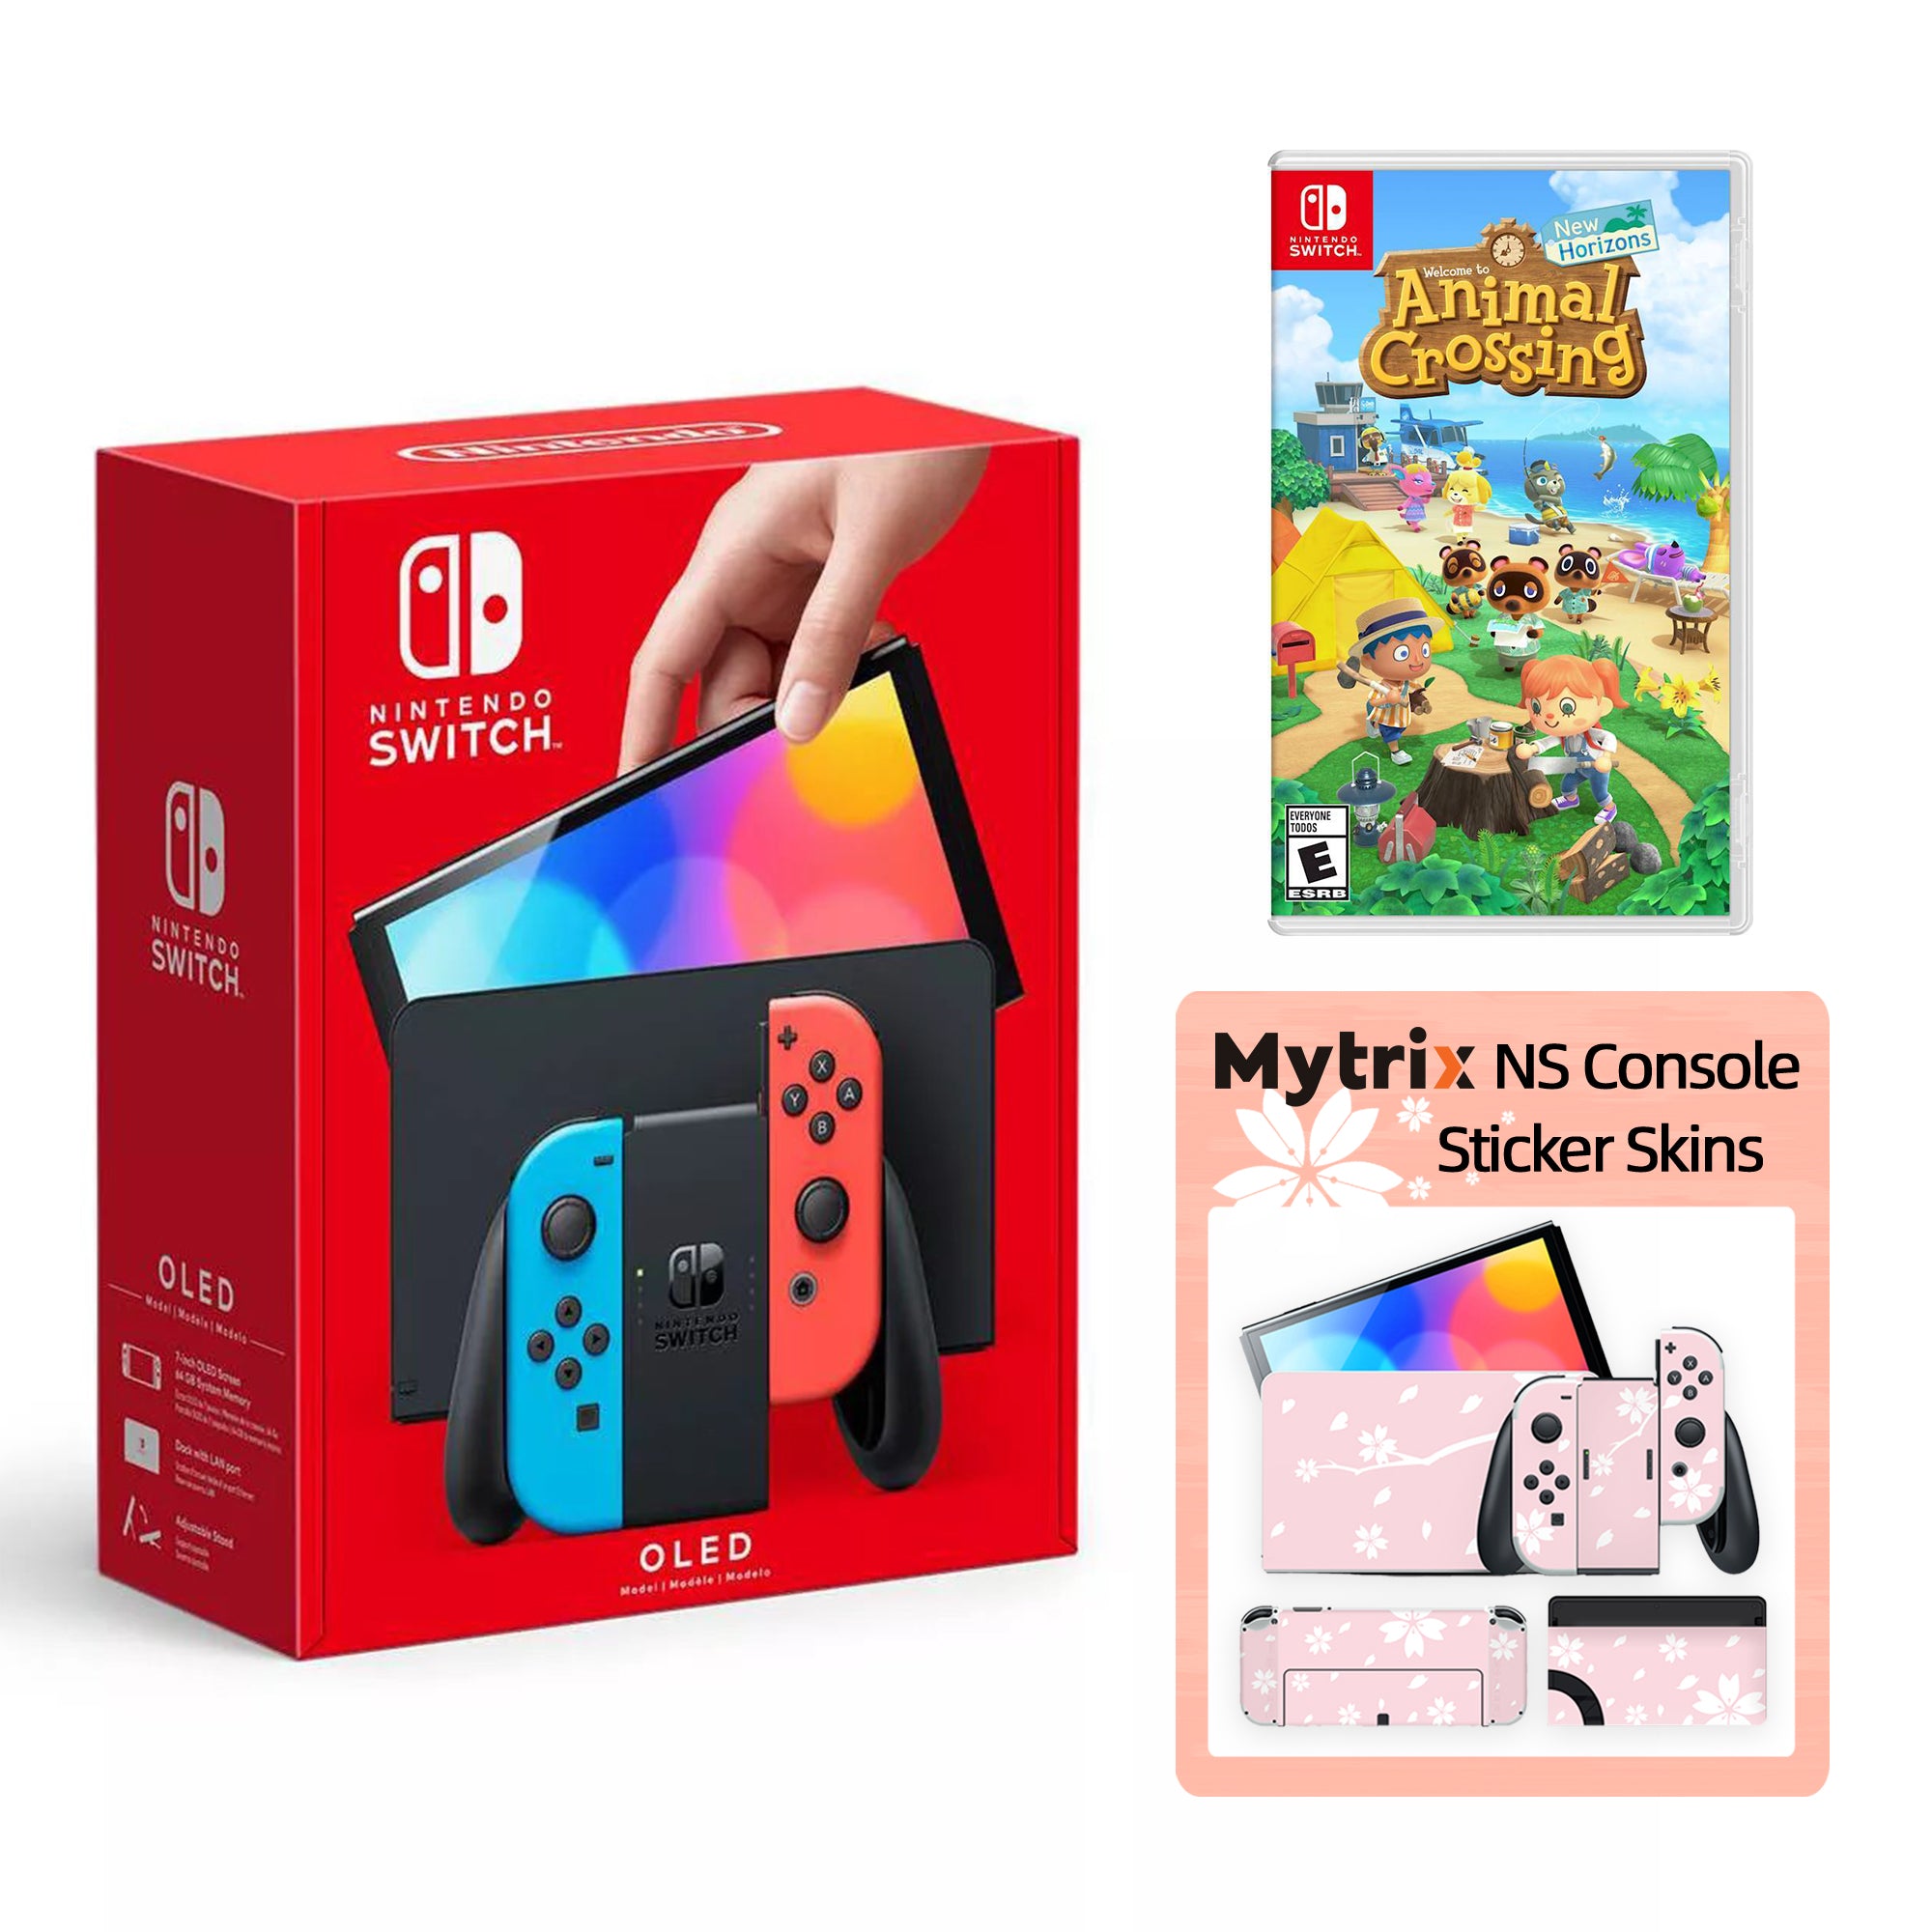 2022 New Nintendo Switch OLED Model Neon Red Blue with Animal Crossing: New Horizons and Mytrix Full Body Skin Sticker for NS OLED Console, Dock and Joycons - Sakura Pink